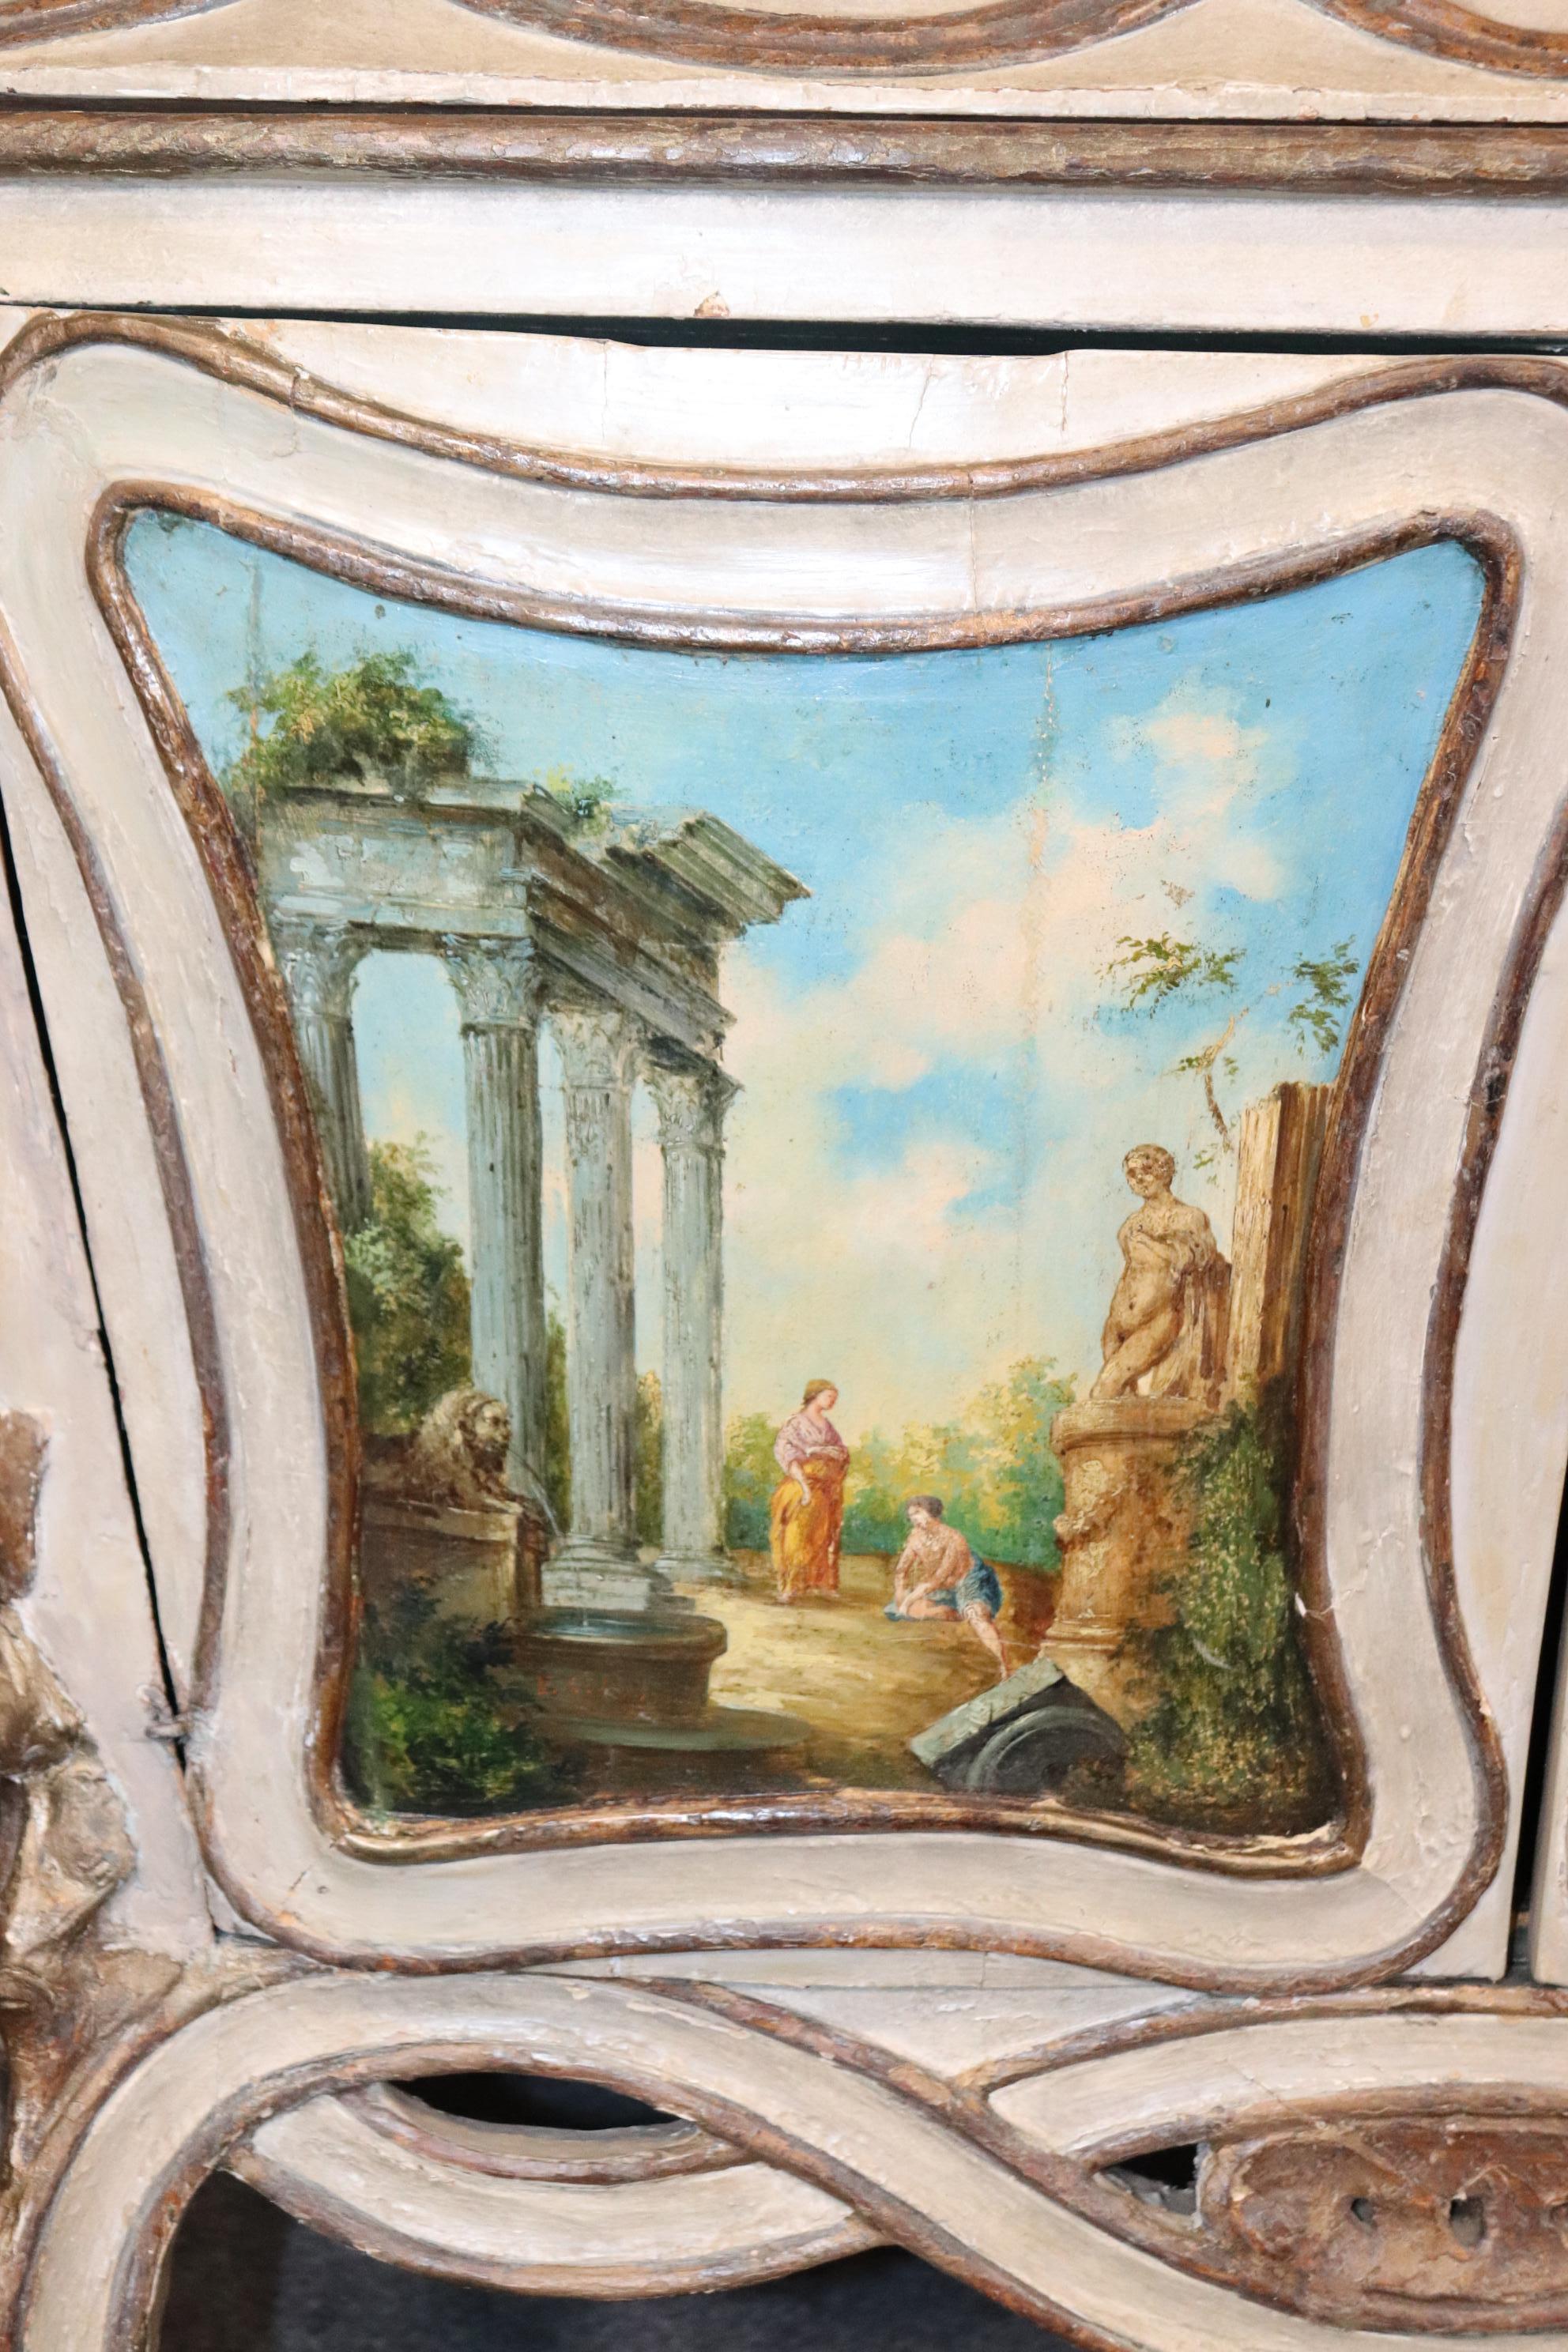 Findining these in the field is extremely difficult as a single commode, but finding a matched pair of period, 1700s era Venetian commodes is next to impossible. This is a fantastic pair of time-worn authentic 1750-1770s era paint decorated commodes